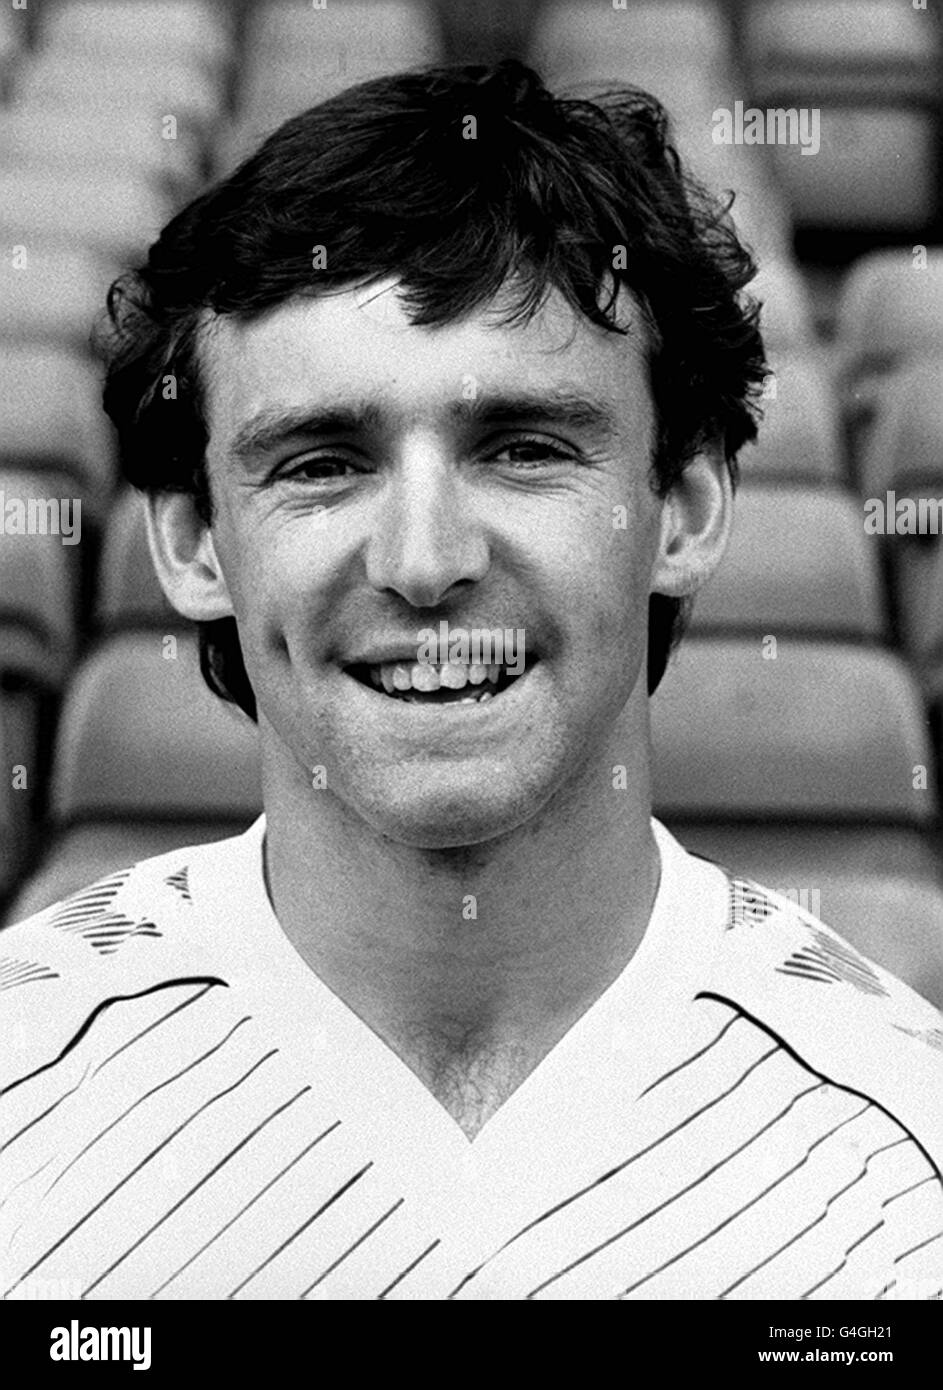 PA NEWS PHOTO 31/7/85 A LIBRARY PHOTO OF PAUL ALLEN OF TOTTENHAM HOTSPUR F.C. AT WHITE HART LANE IN NORTH LONDON Stock Photo